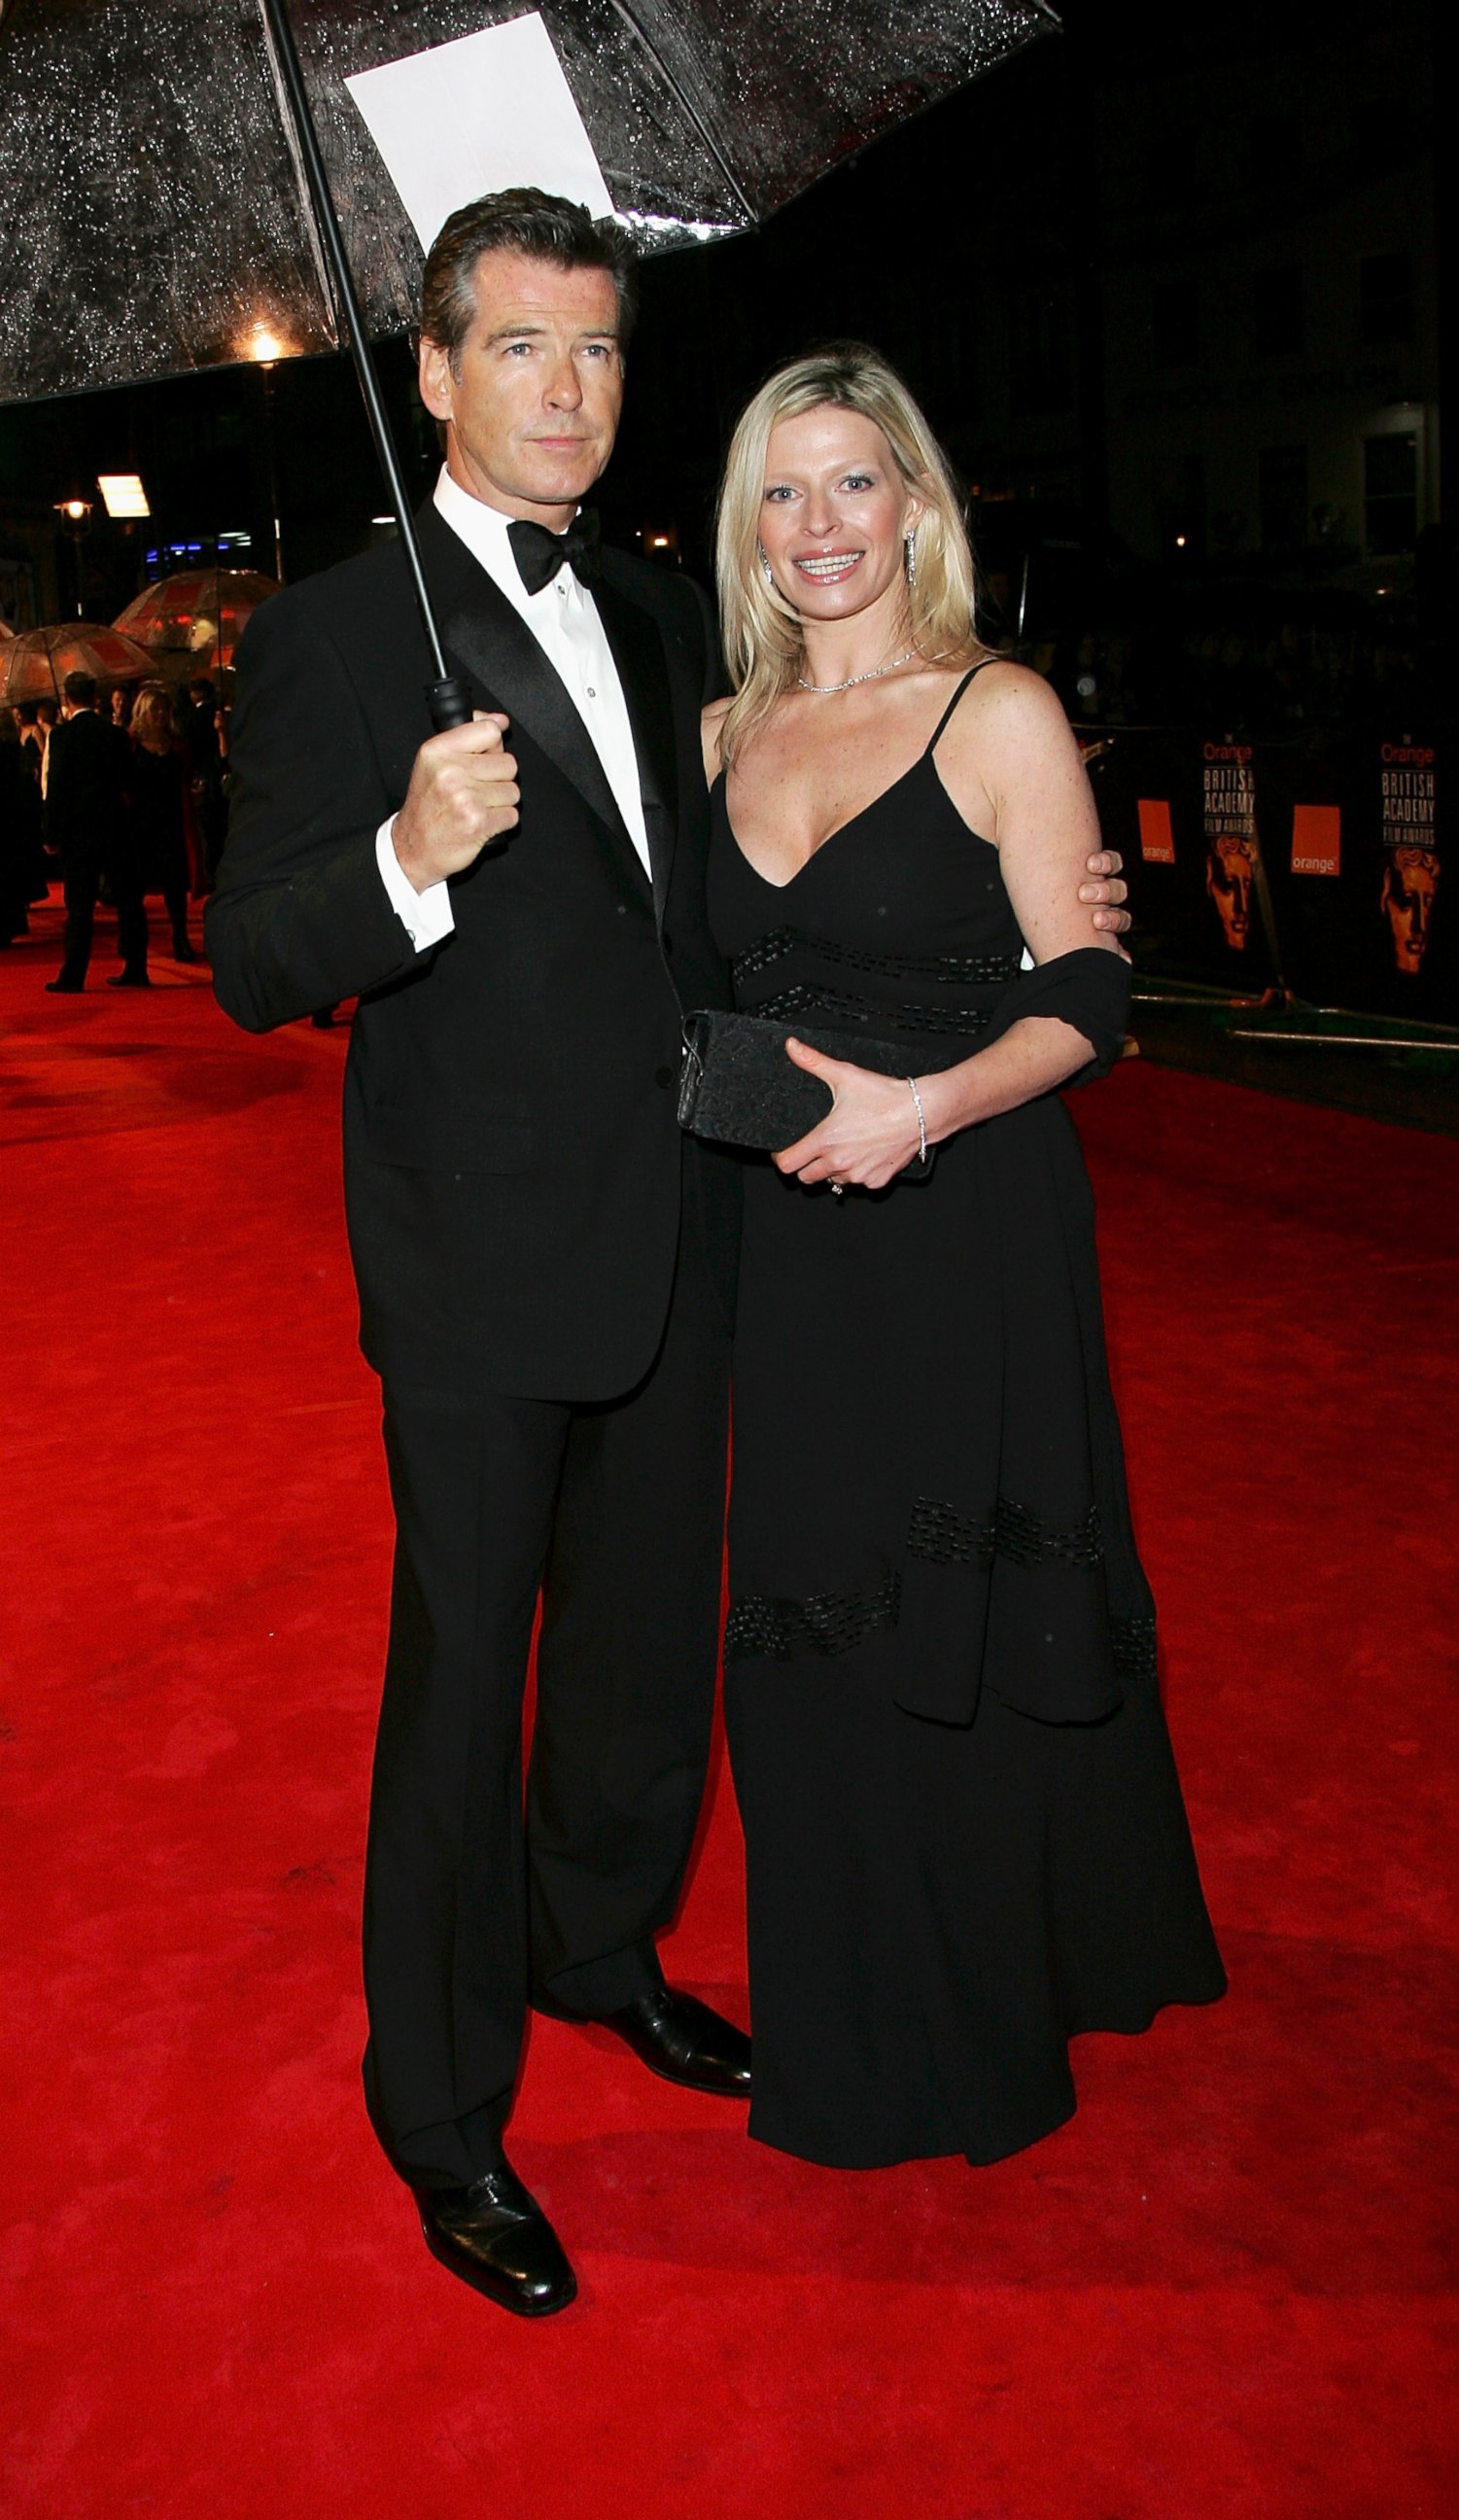 PHOTO: Actor Pierce Brosnan and daughter Charlotte arrive at The Orange British Academy Film Awards at the Odeon Leicester Square in this Feb. 19, 2006 file photo in London.